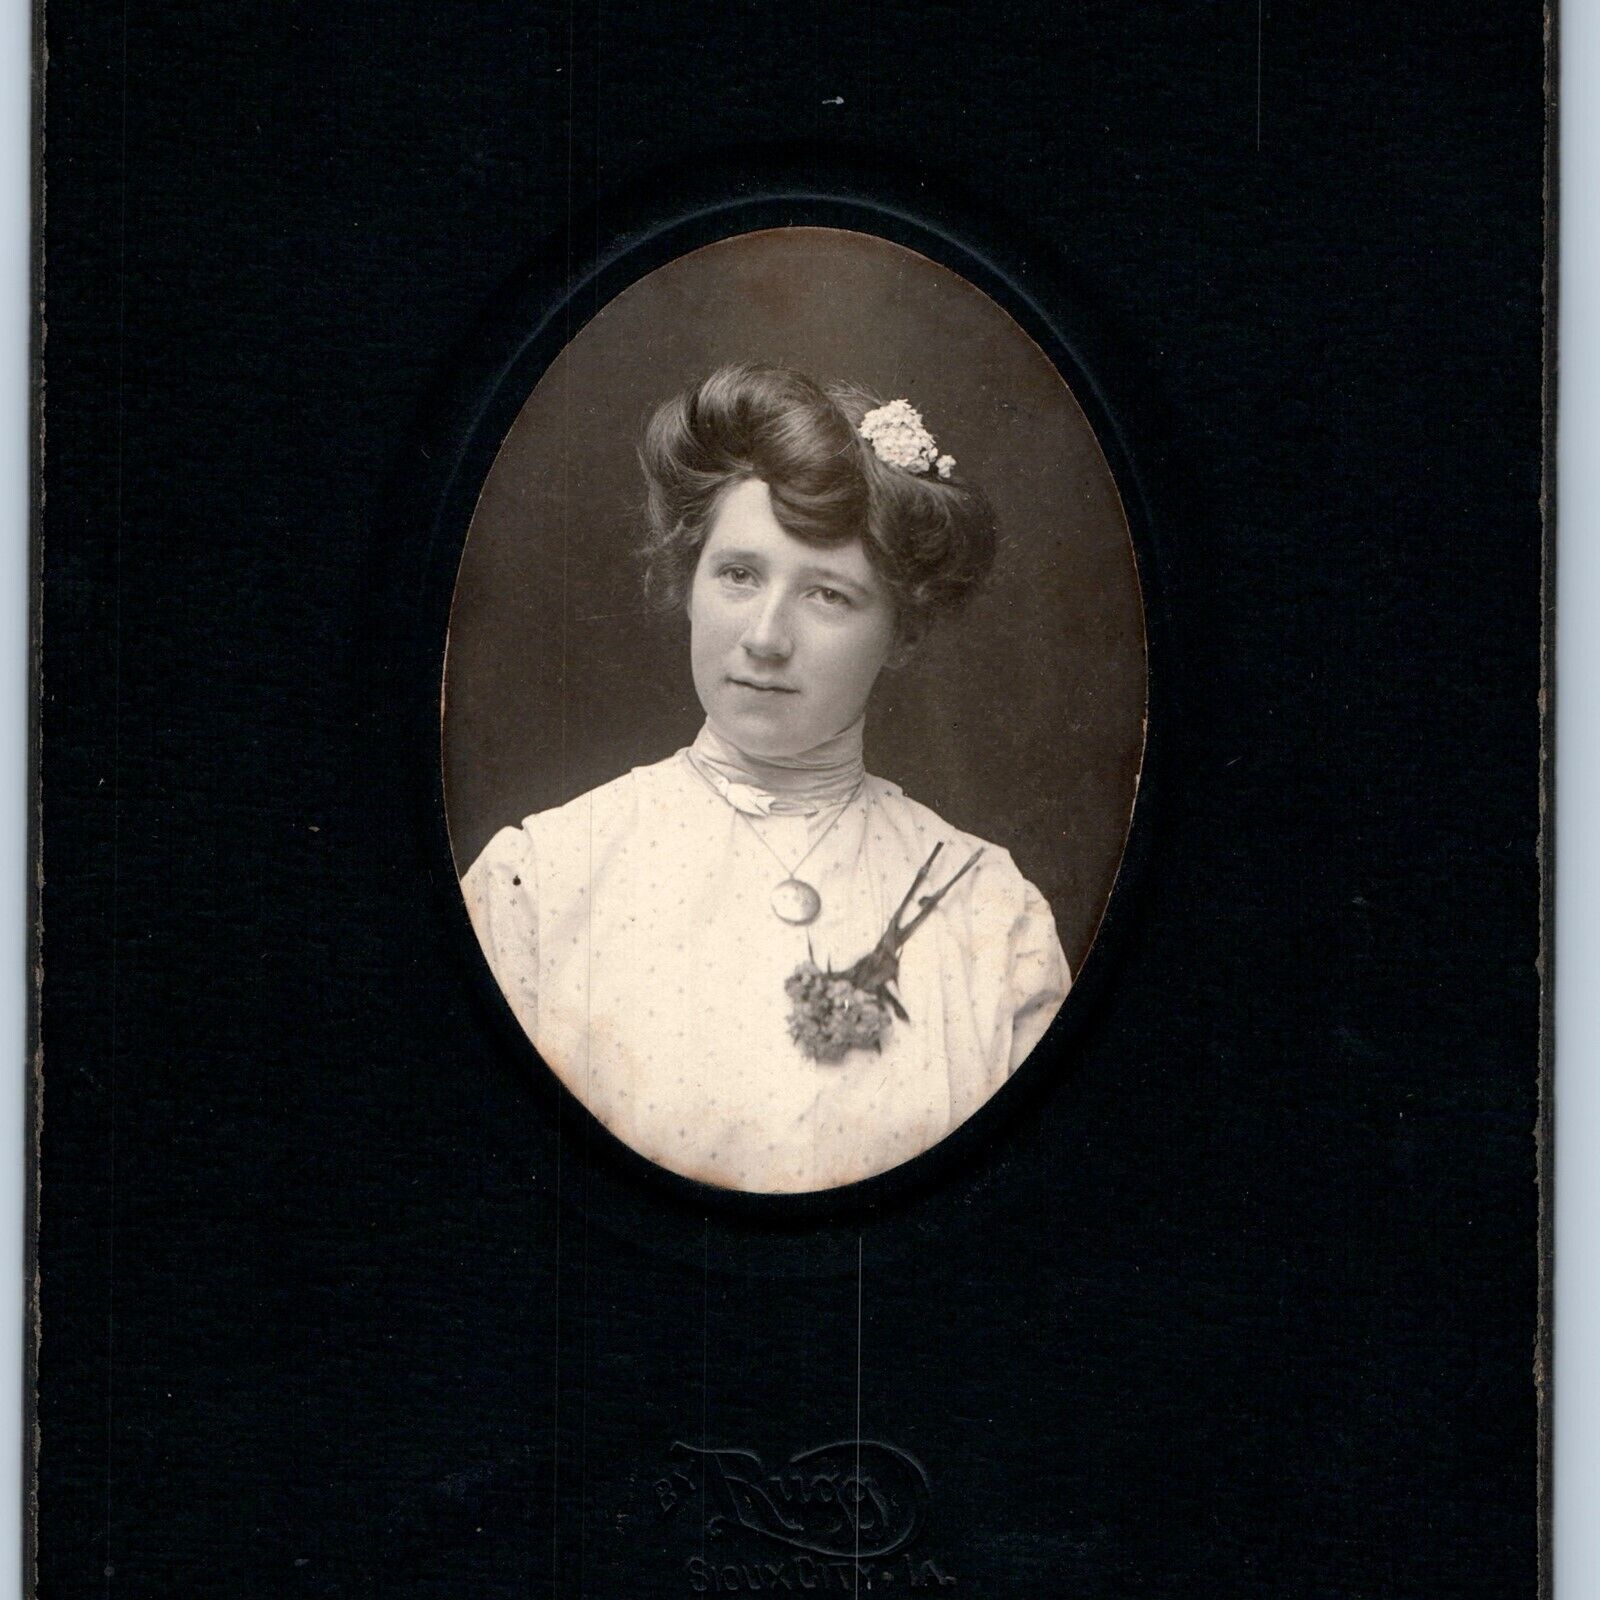 c1900s Sioux City, Iowa Cute Lovely Woman Cabinet Card Oval Photo Rugg IA B4